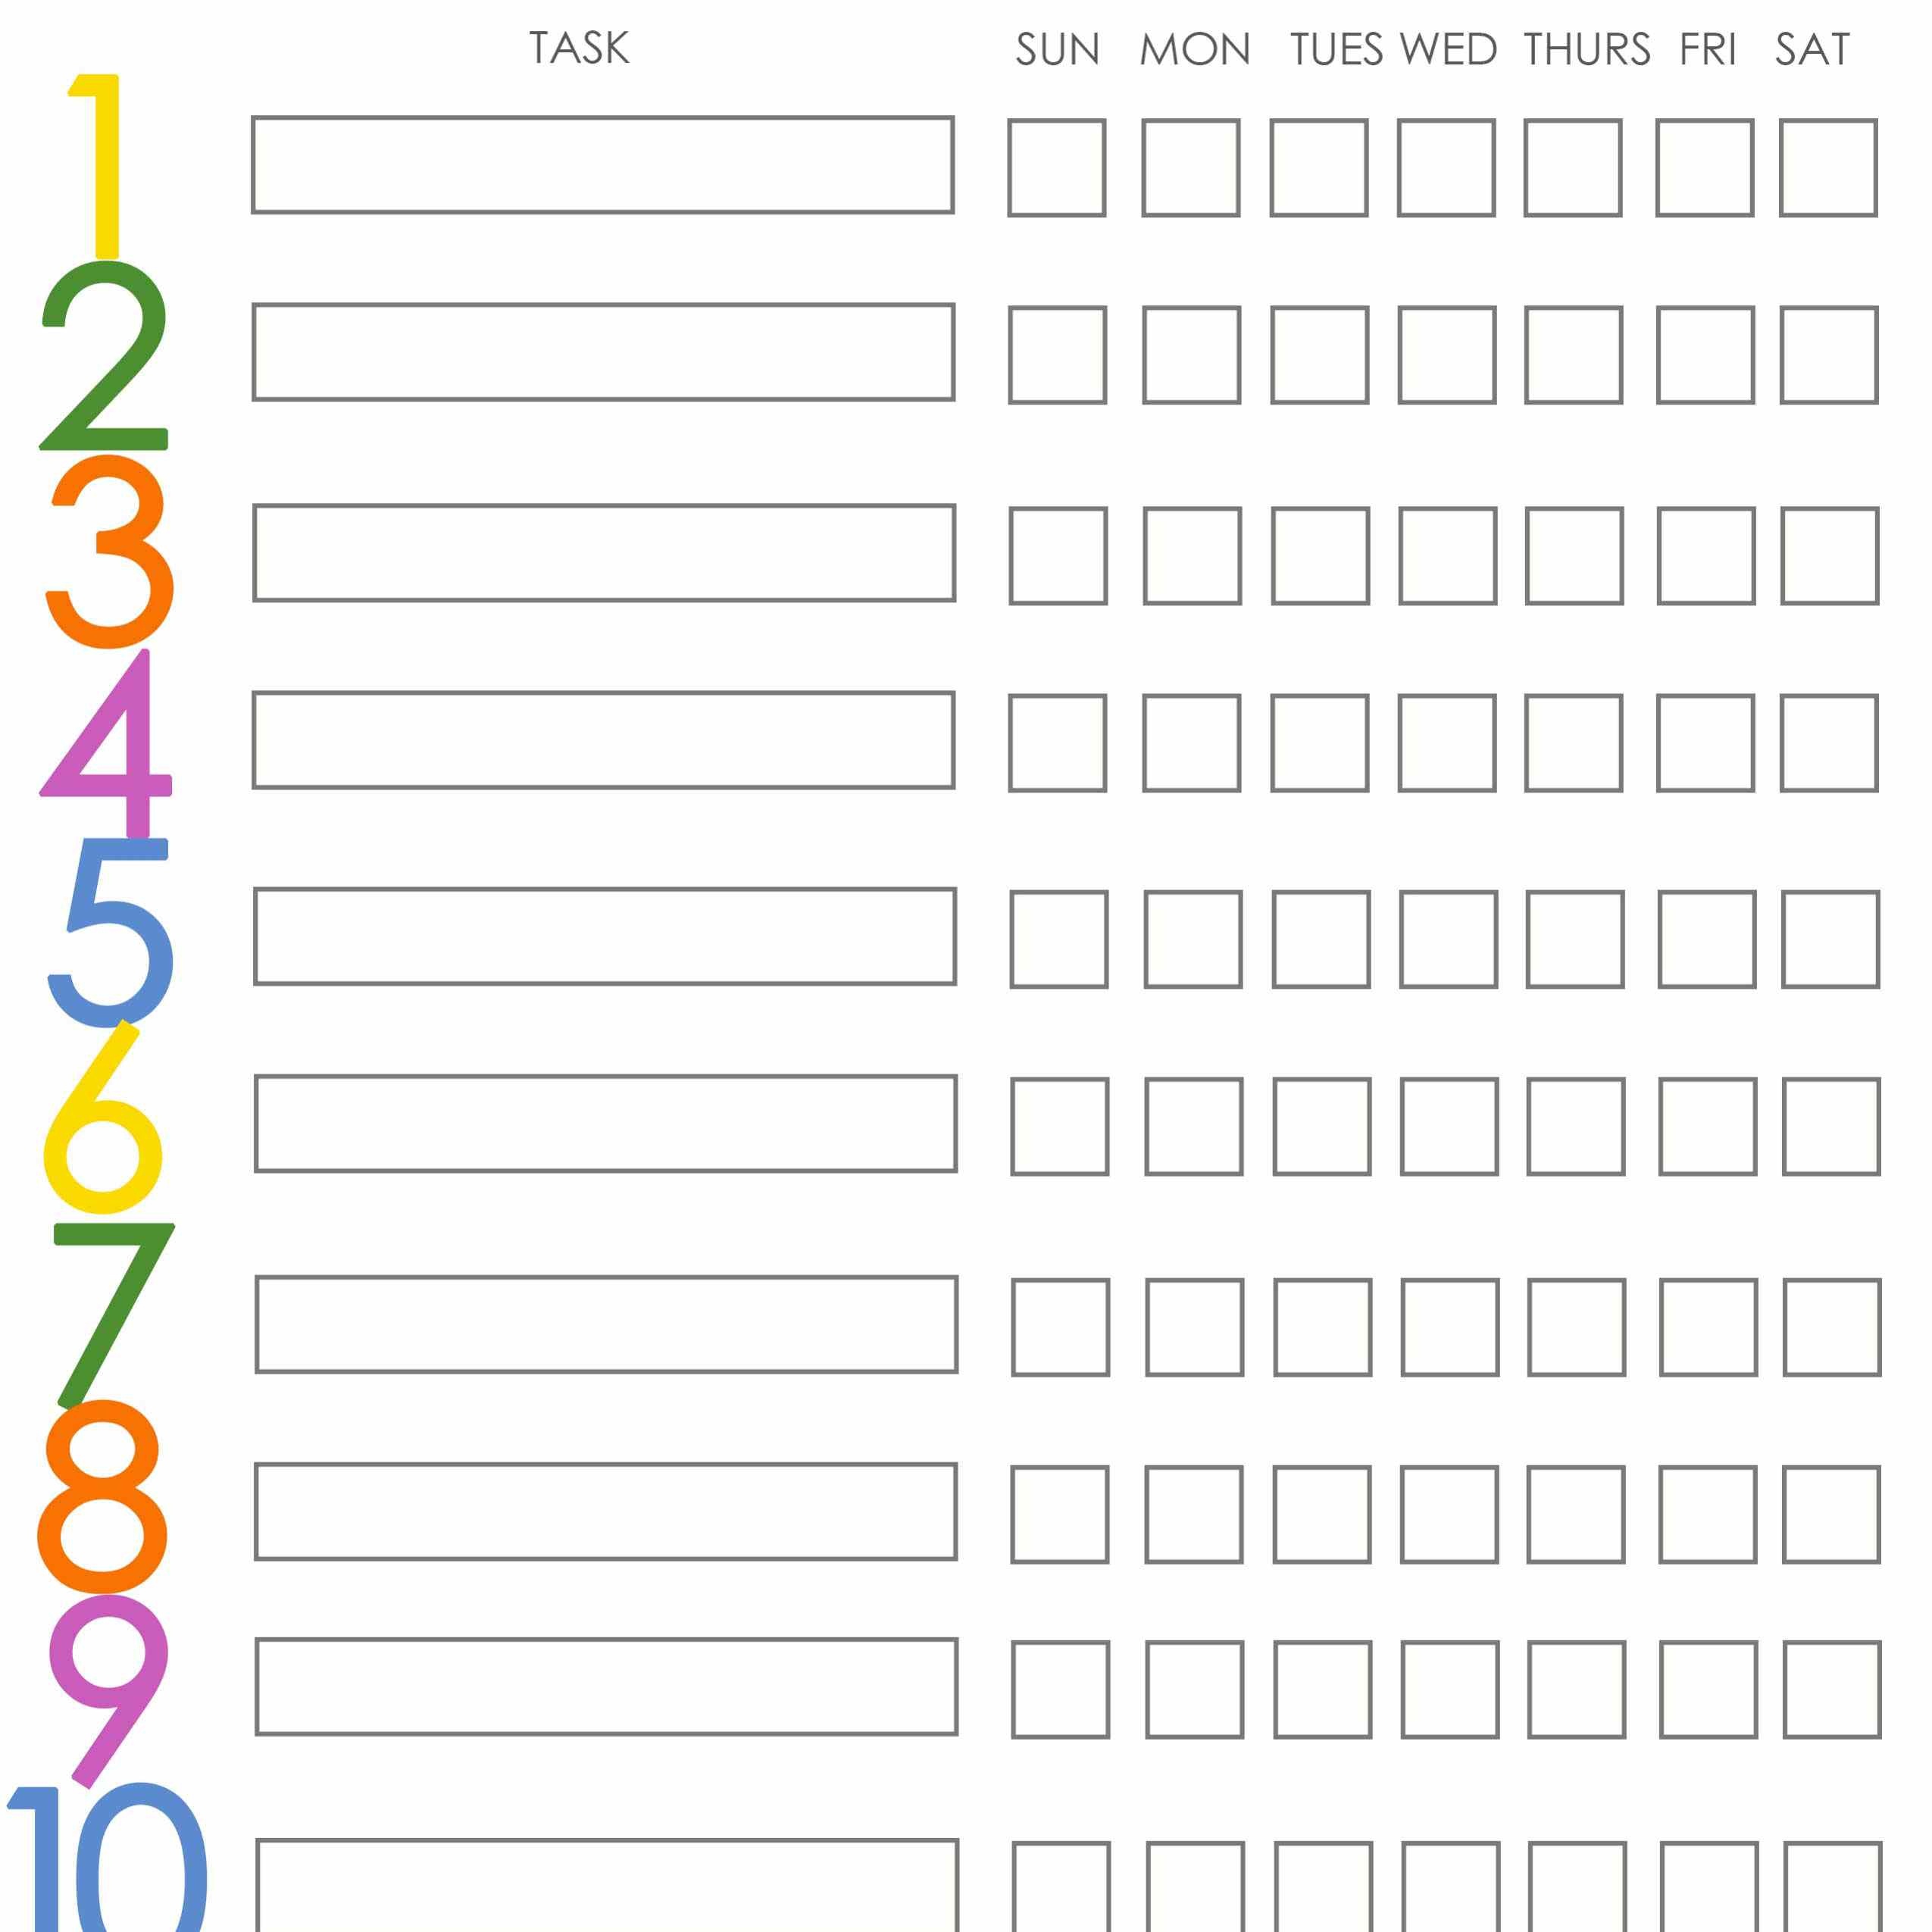 Free Printable Weekly Chore Charts - Free Printable Chore Charts For 10 Year Olds